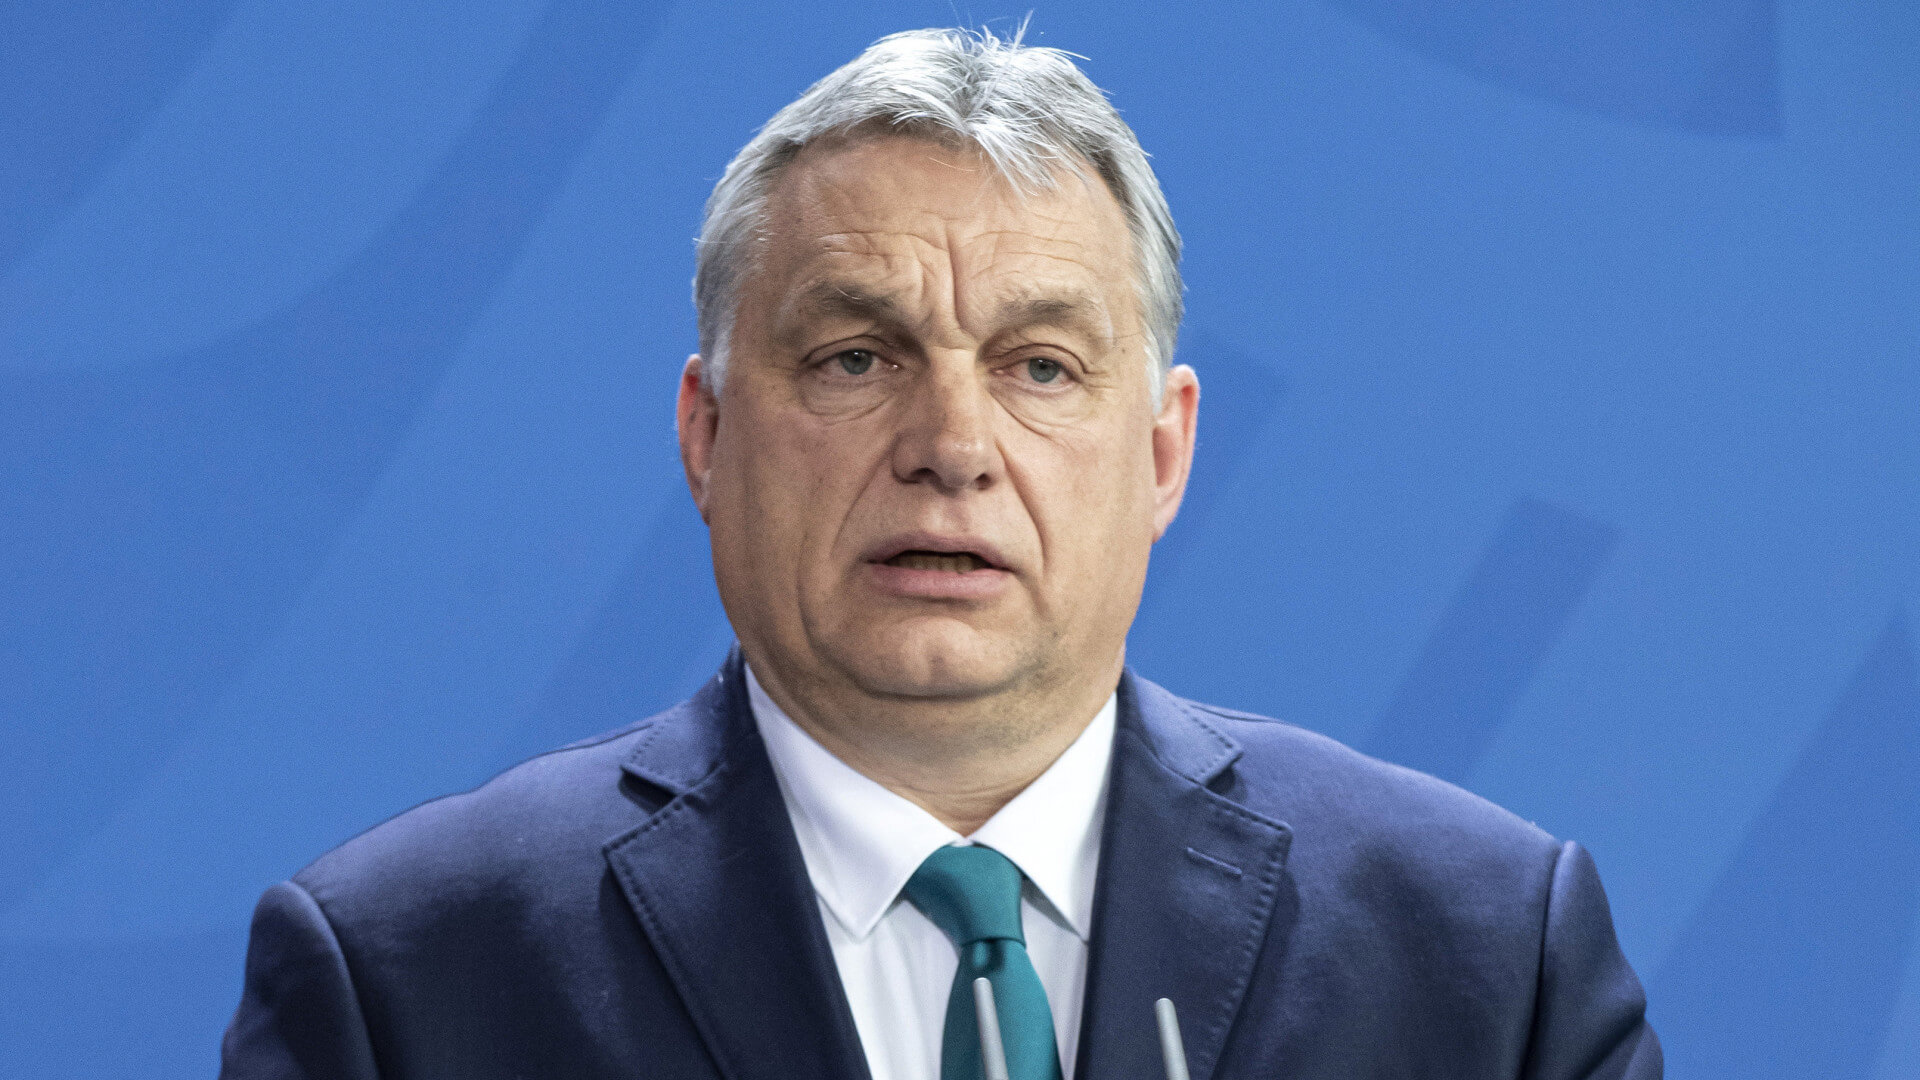 Updated: Foreign & Indie Media Barred from Orbán’s Big Speech This Saturday